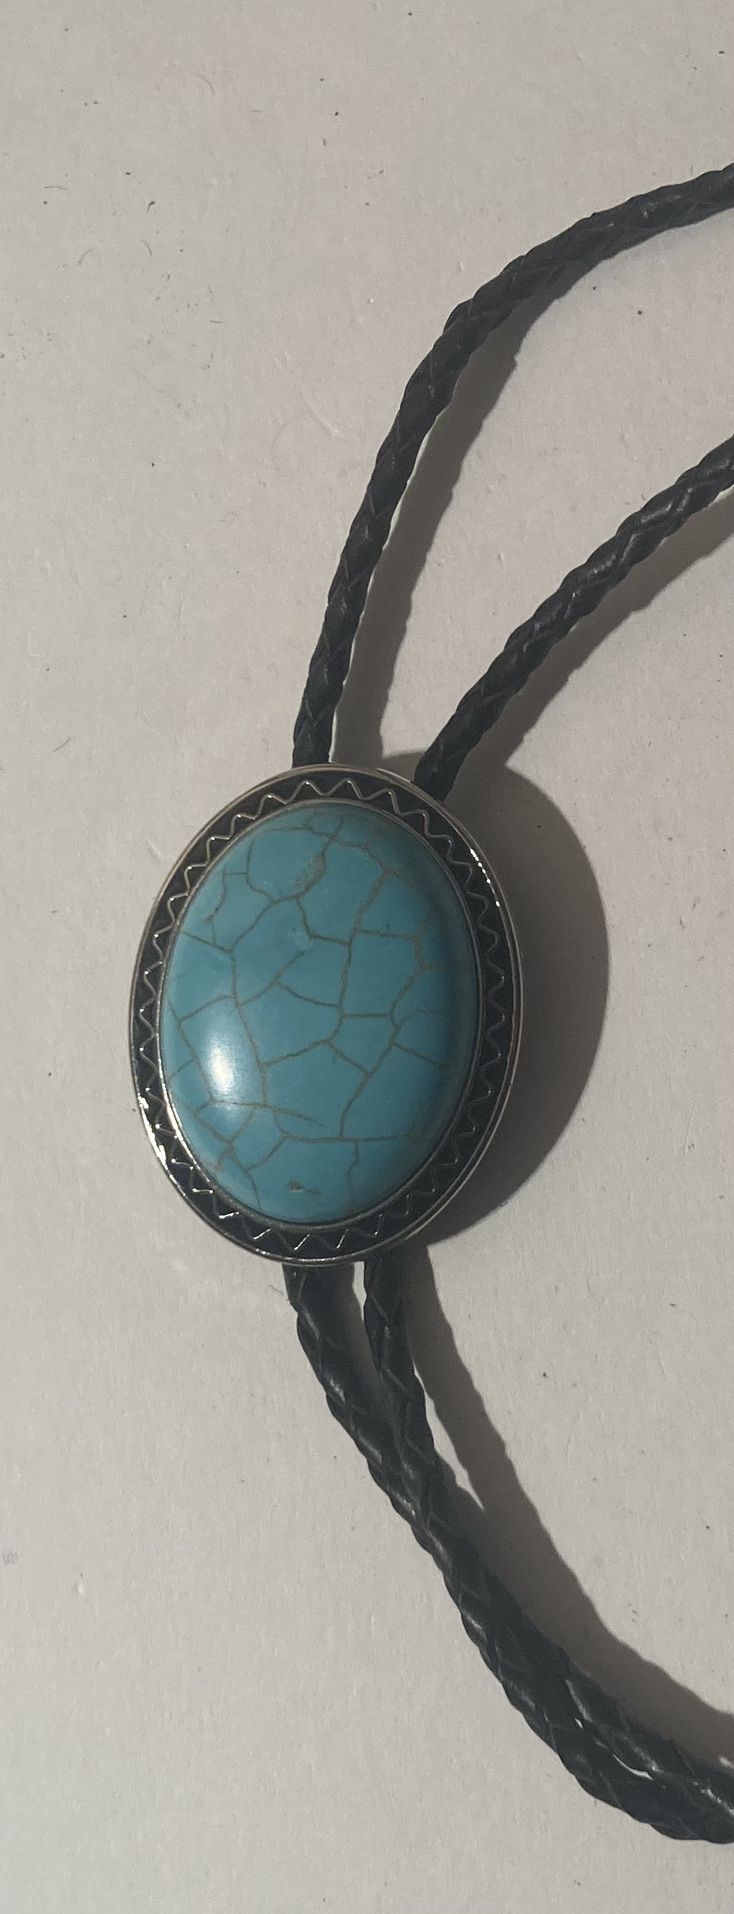 Vintage Bolo Tie Silver And Turquoise 